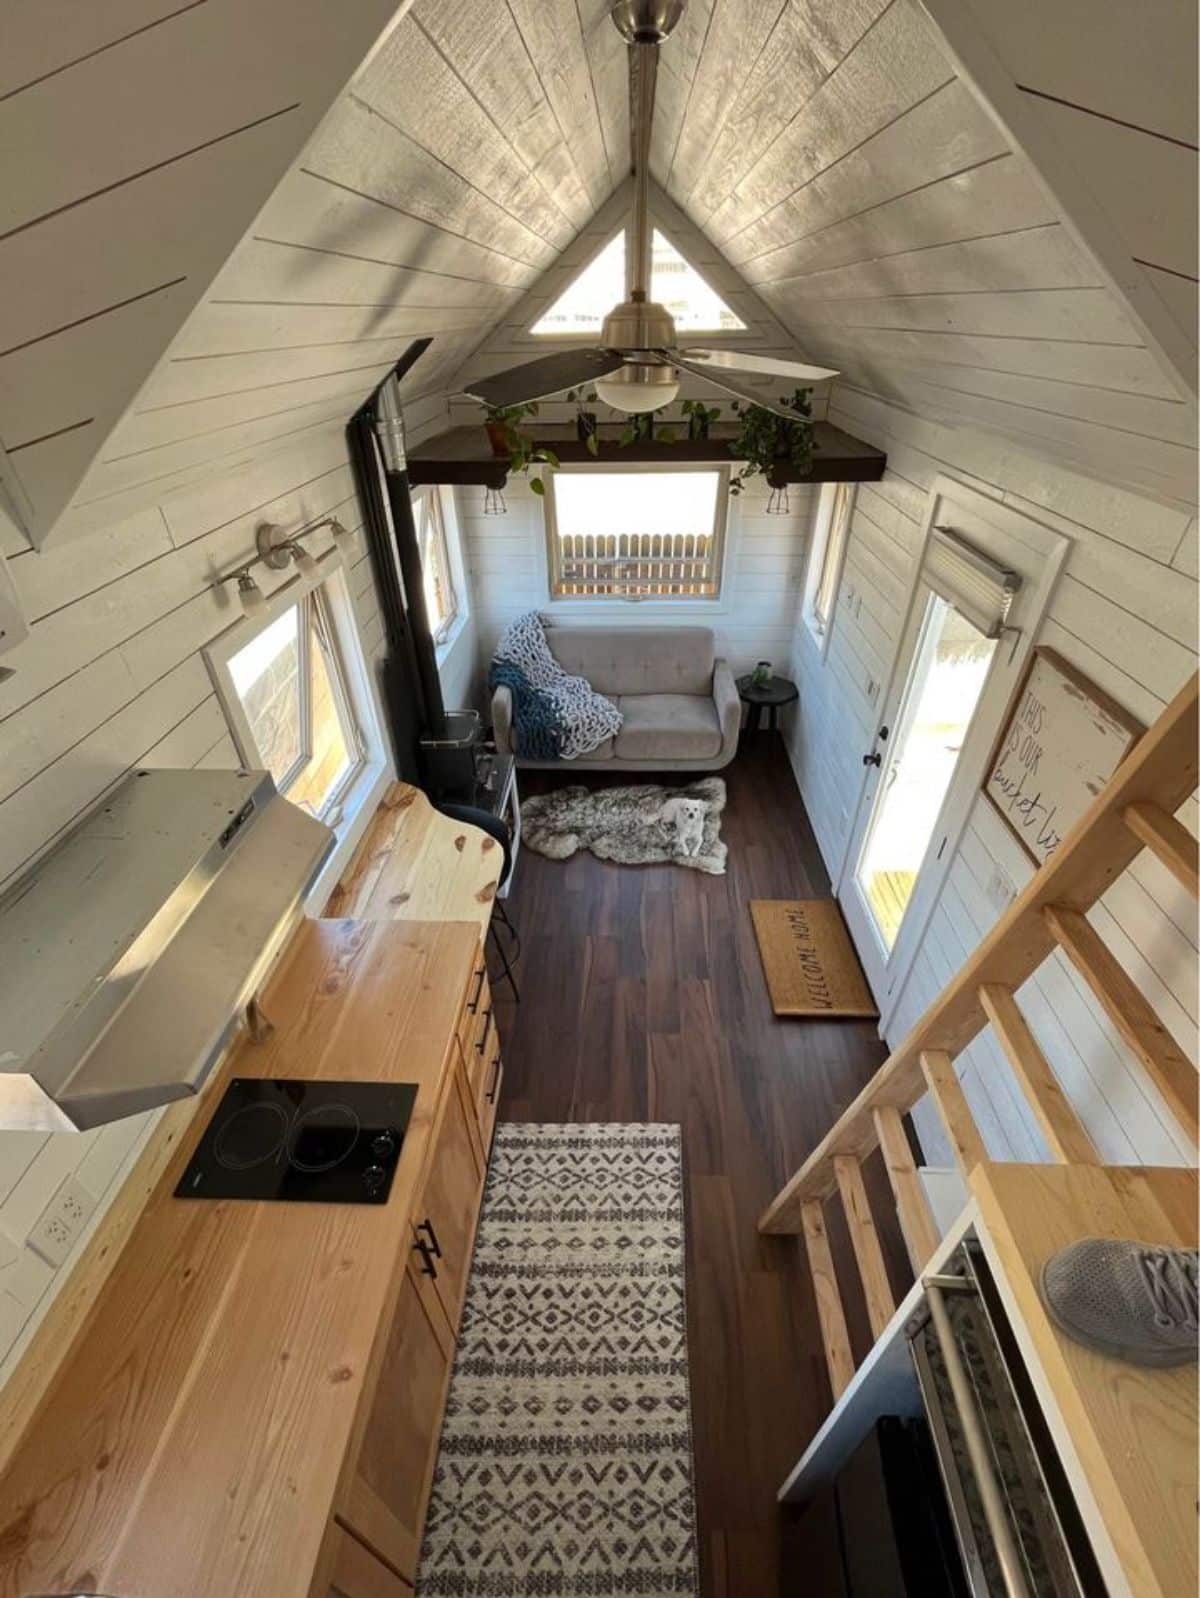 loft is above the bathroom and is accessible through ladder